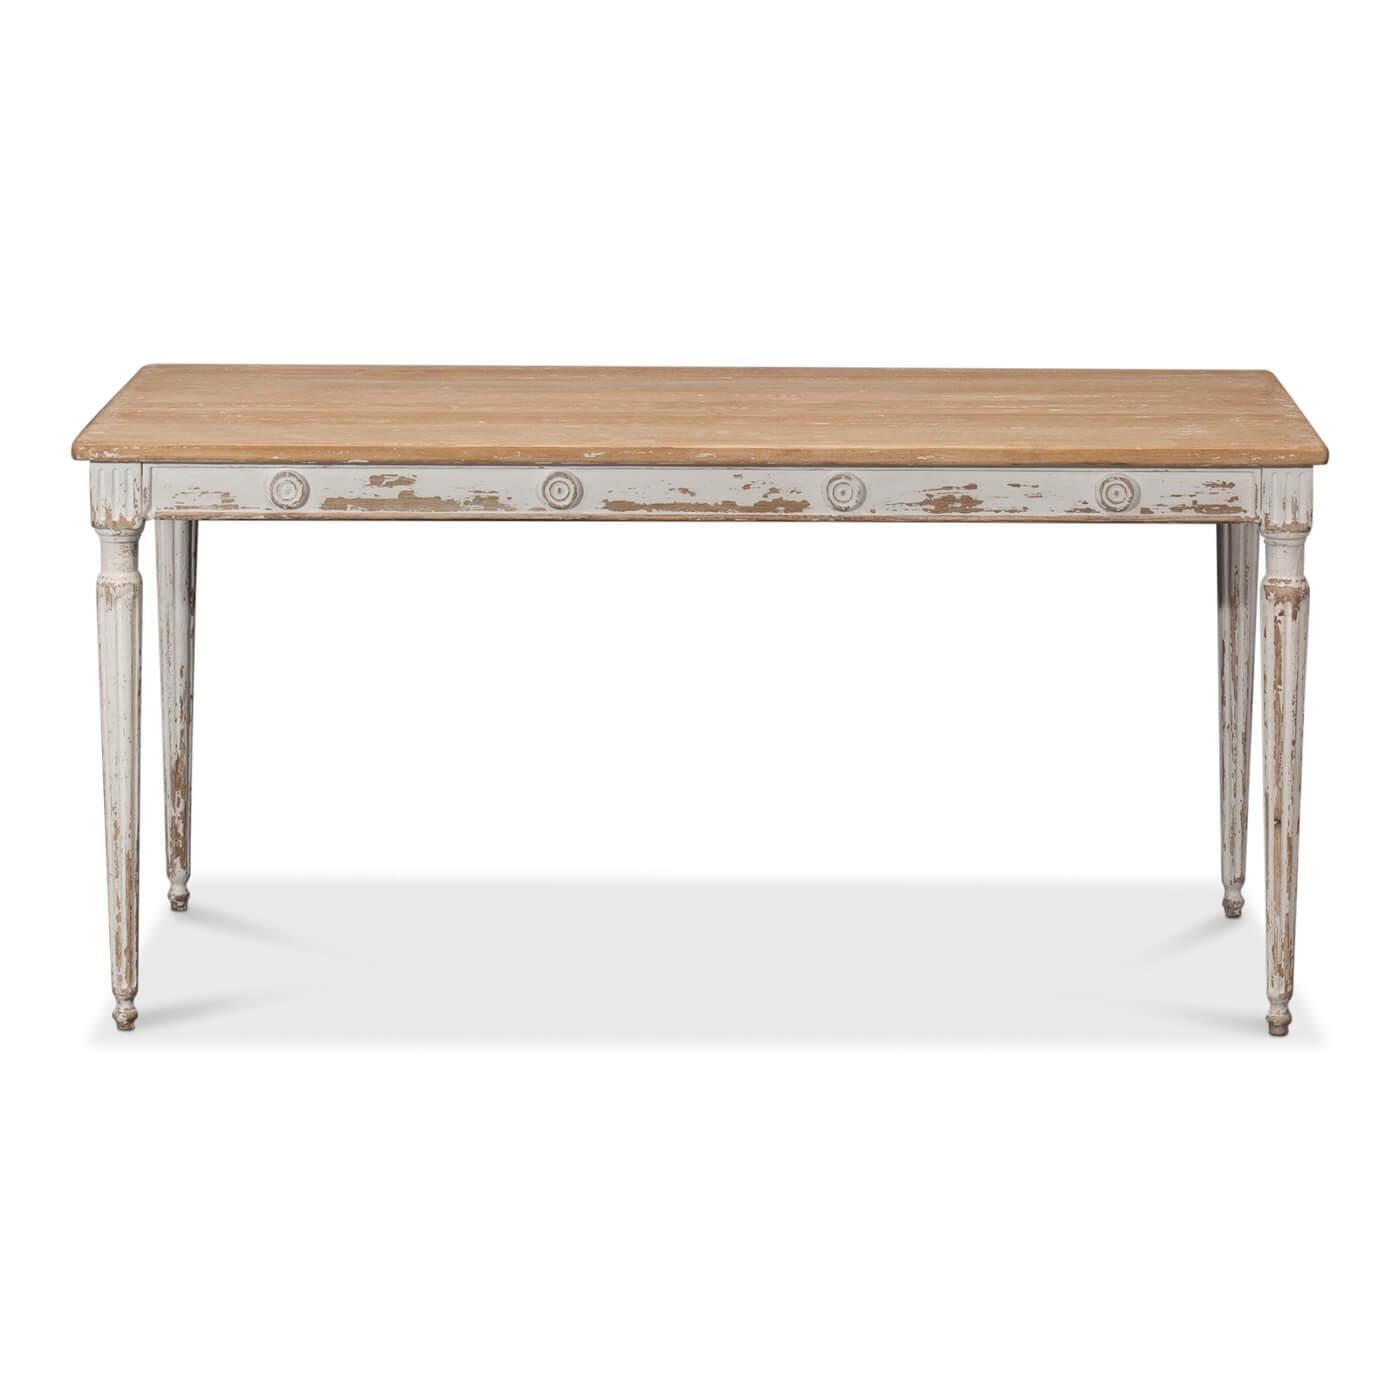 French Country rustic style dining table with pine top. The table apron has medallion accents and sits upon white distressed turned, tapered, and fluted legs. 

Dimensions: 63